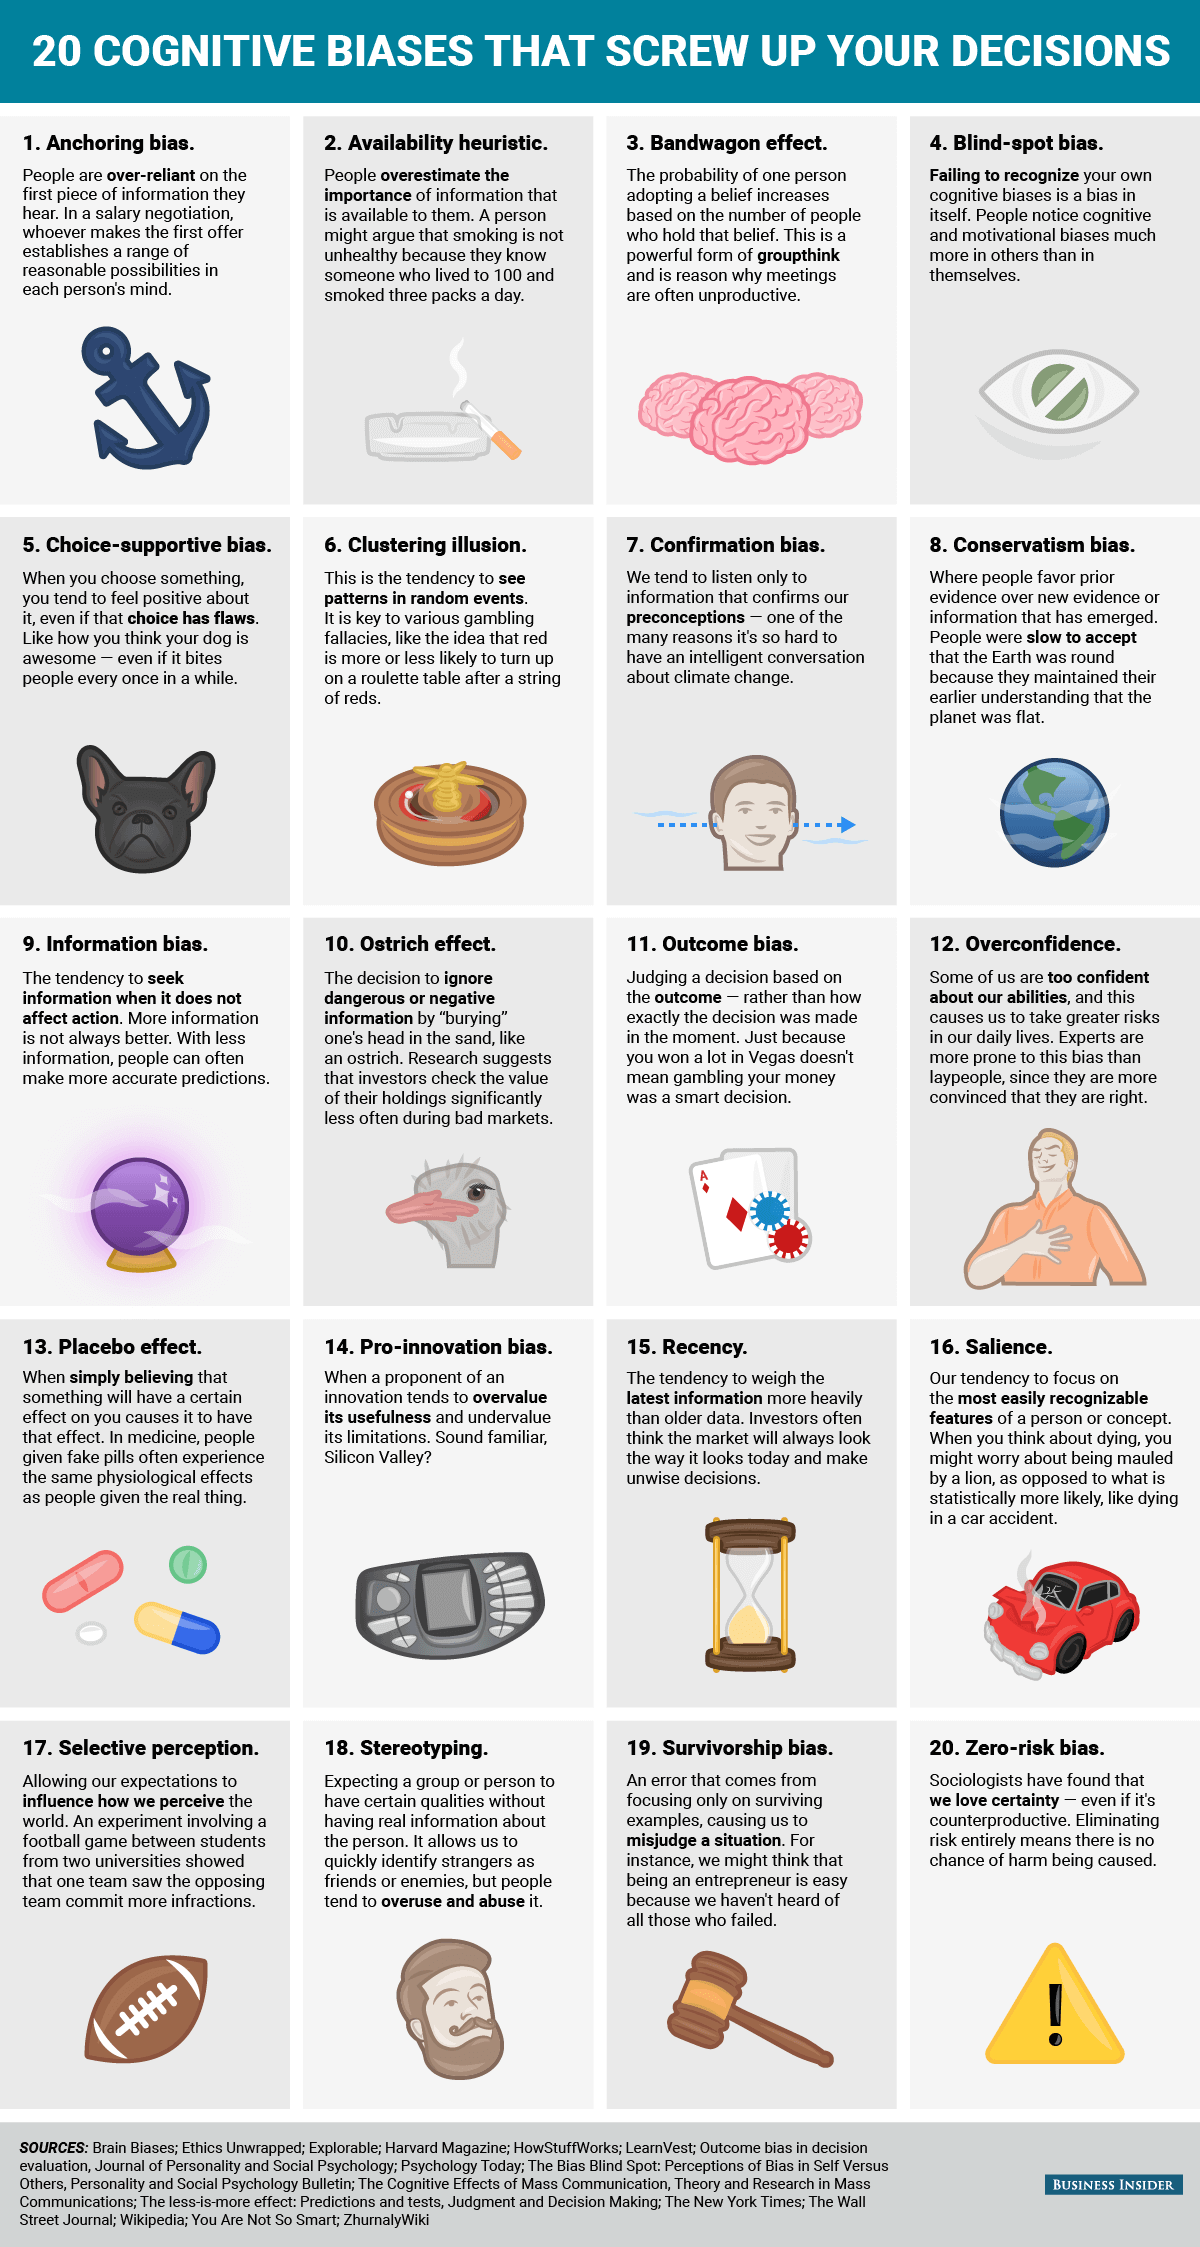 20-cognitive-biases-that-screw-up-your-decisions